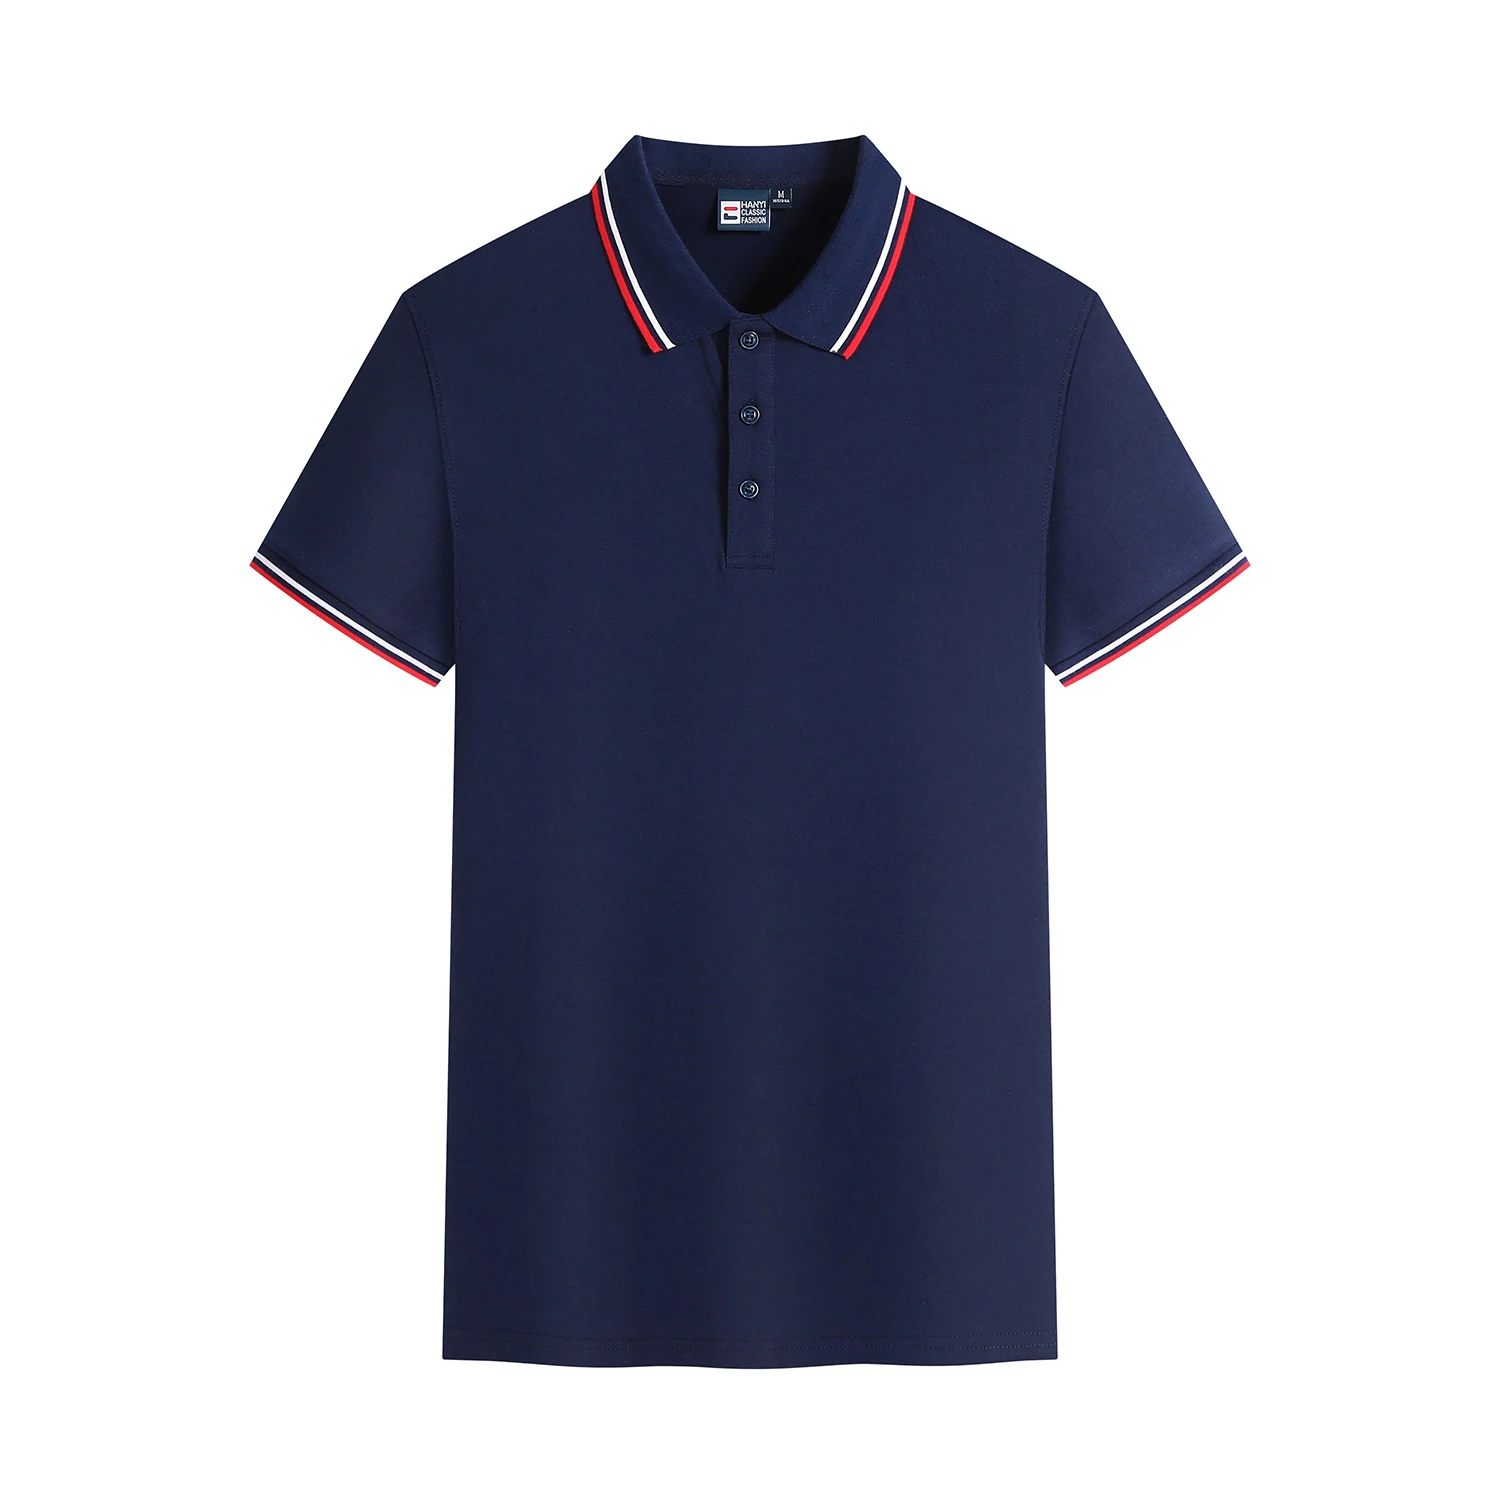 2022 new Personalized Customize men polo shirt short sleeve advertising shirt A1081 navy blue white cotton polyester spandex